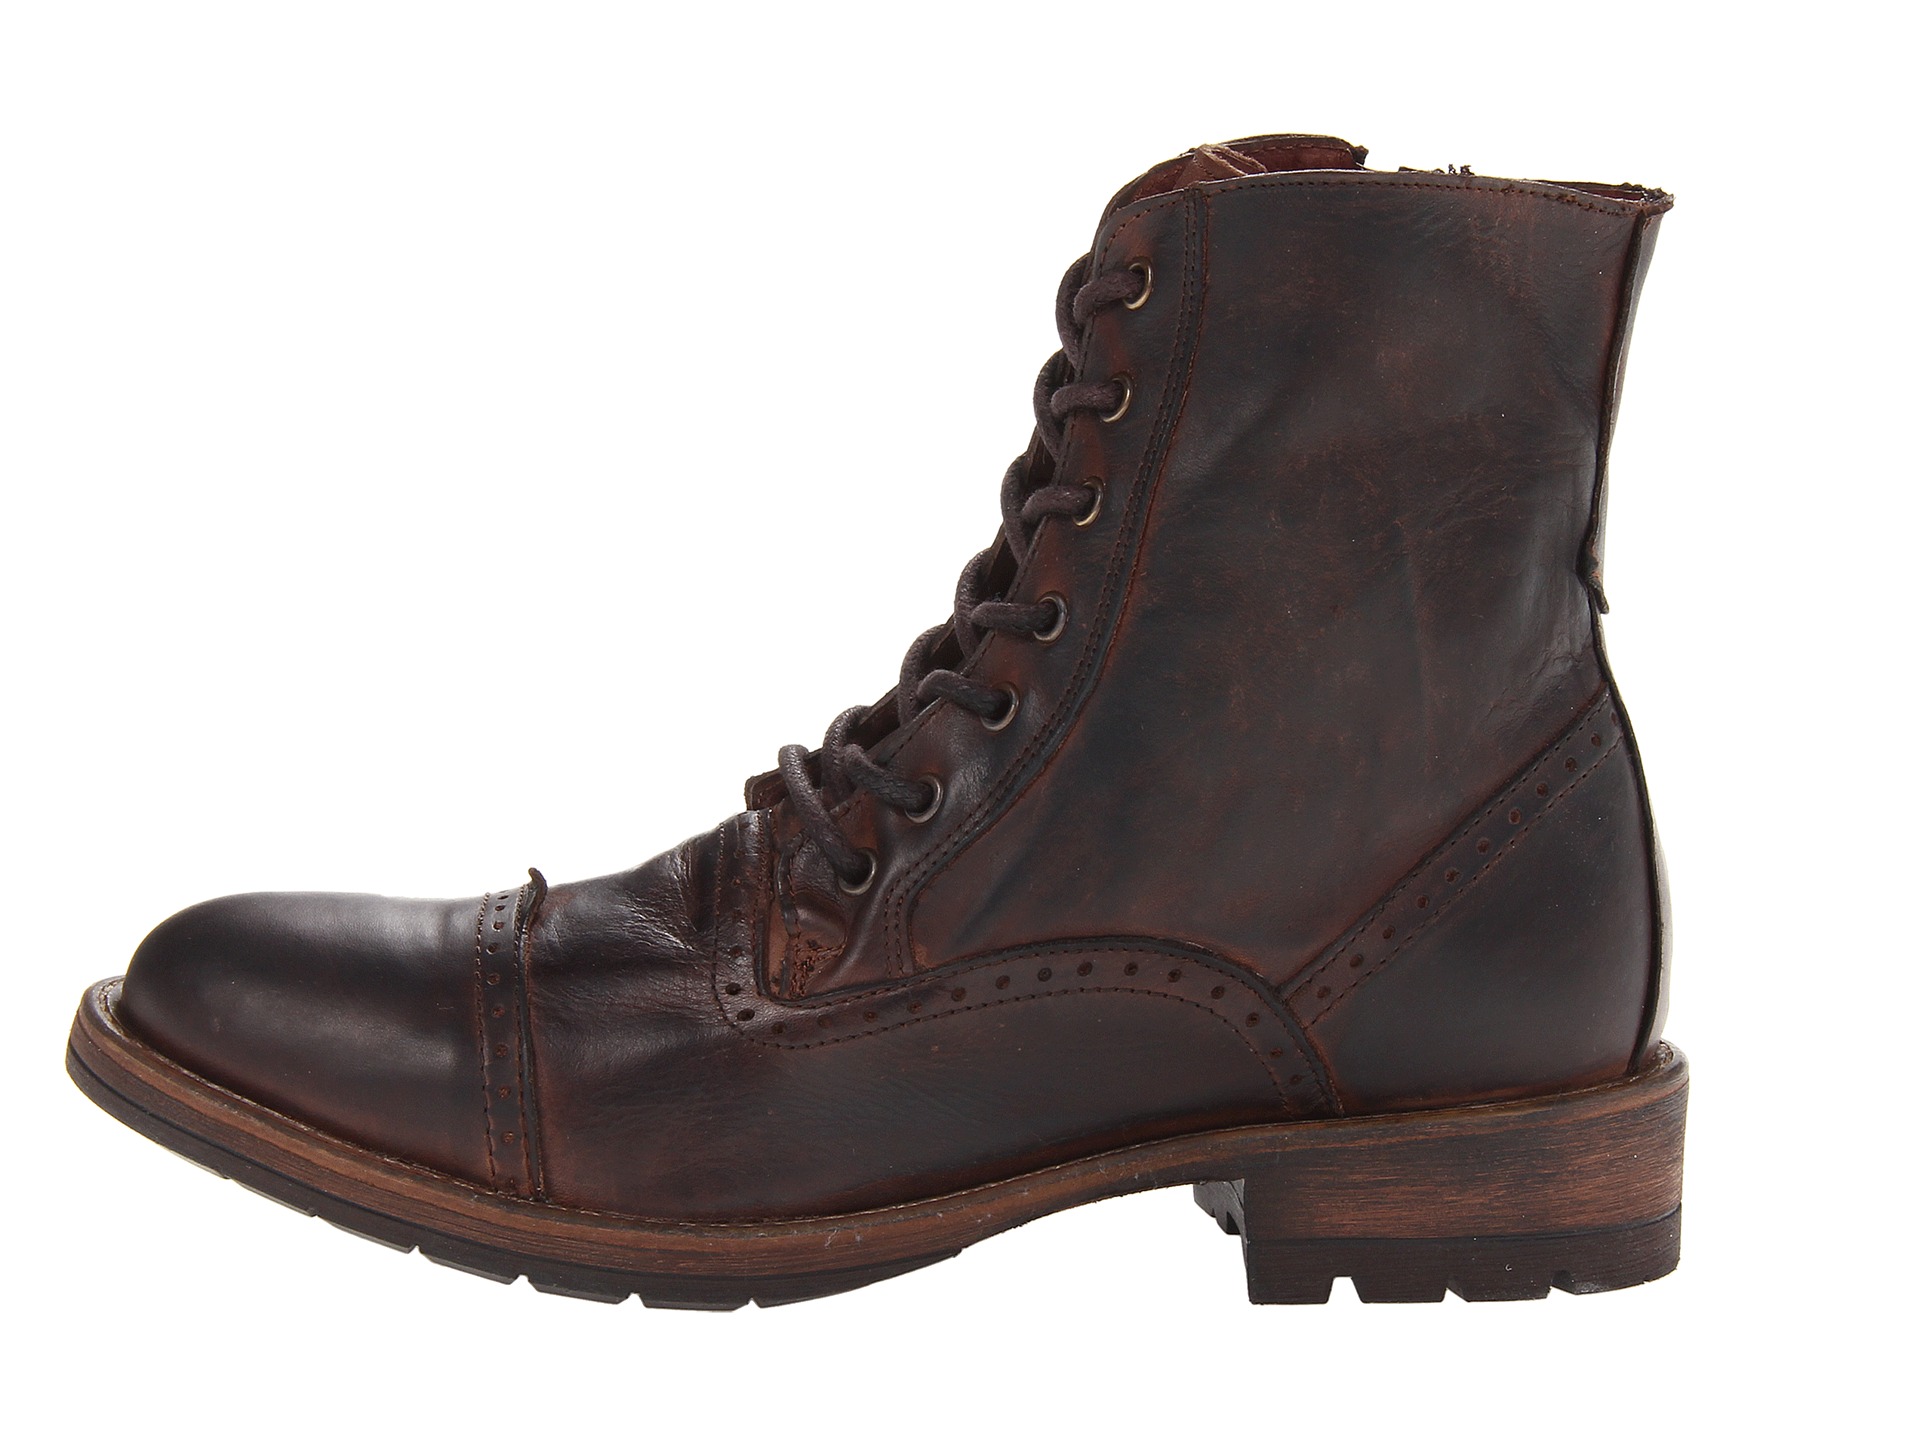 Steve Madden Nathen Brown Leather | Shipped Free at Zappos